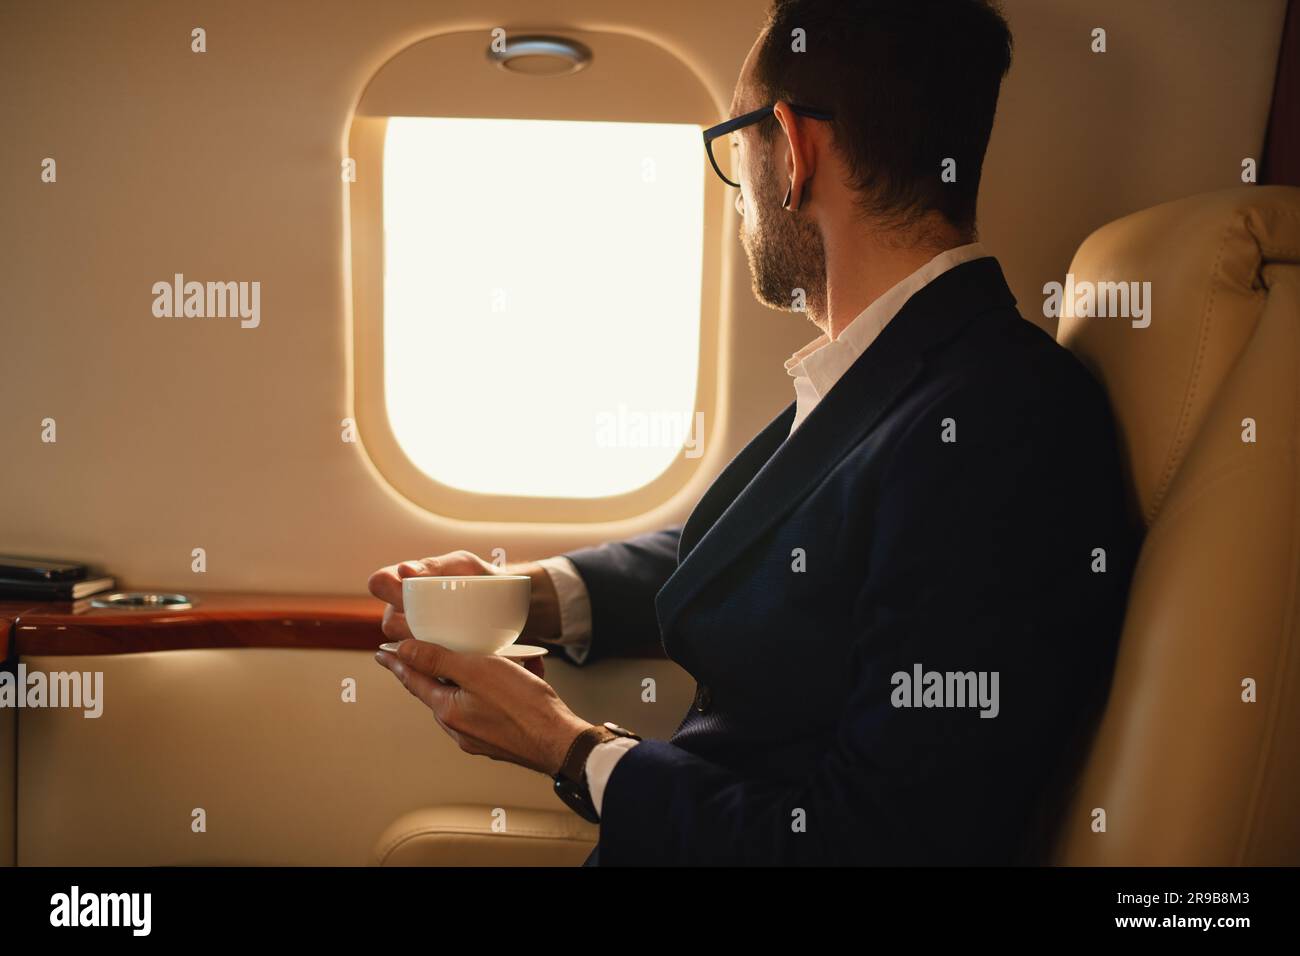 Unrecognizable Elegant CEO Businessman with eyeglasses in a blue jacket sitting inside a private airplane jet drinking coffee looking through a window Stock Photo